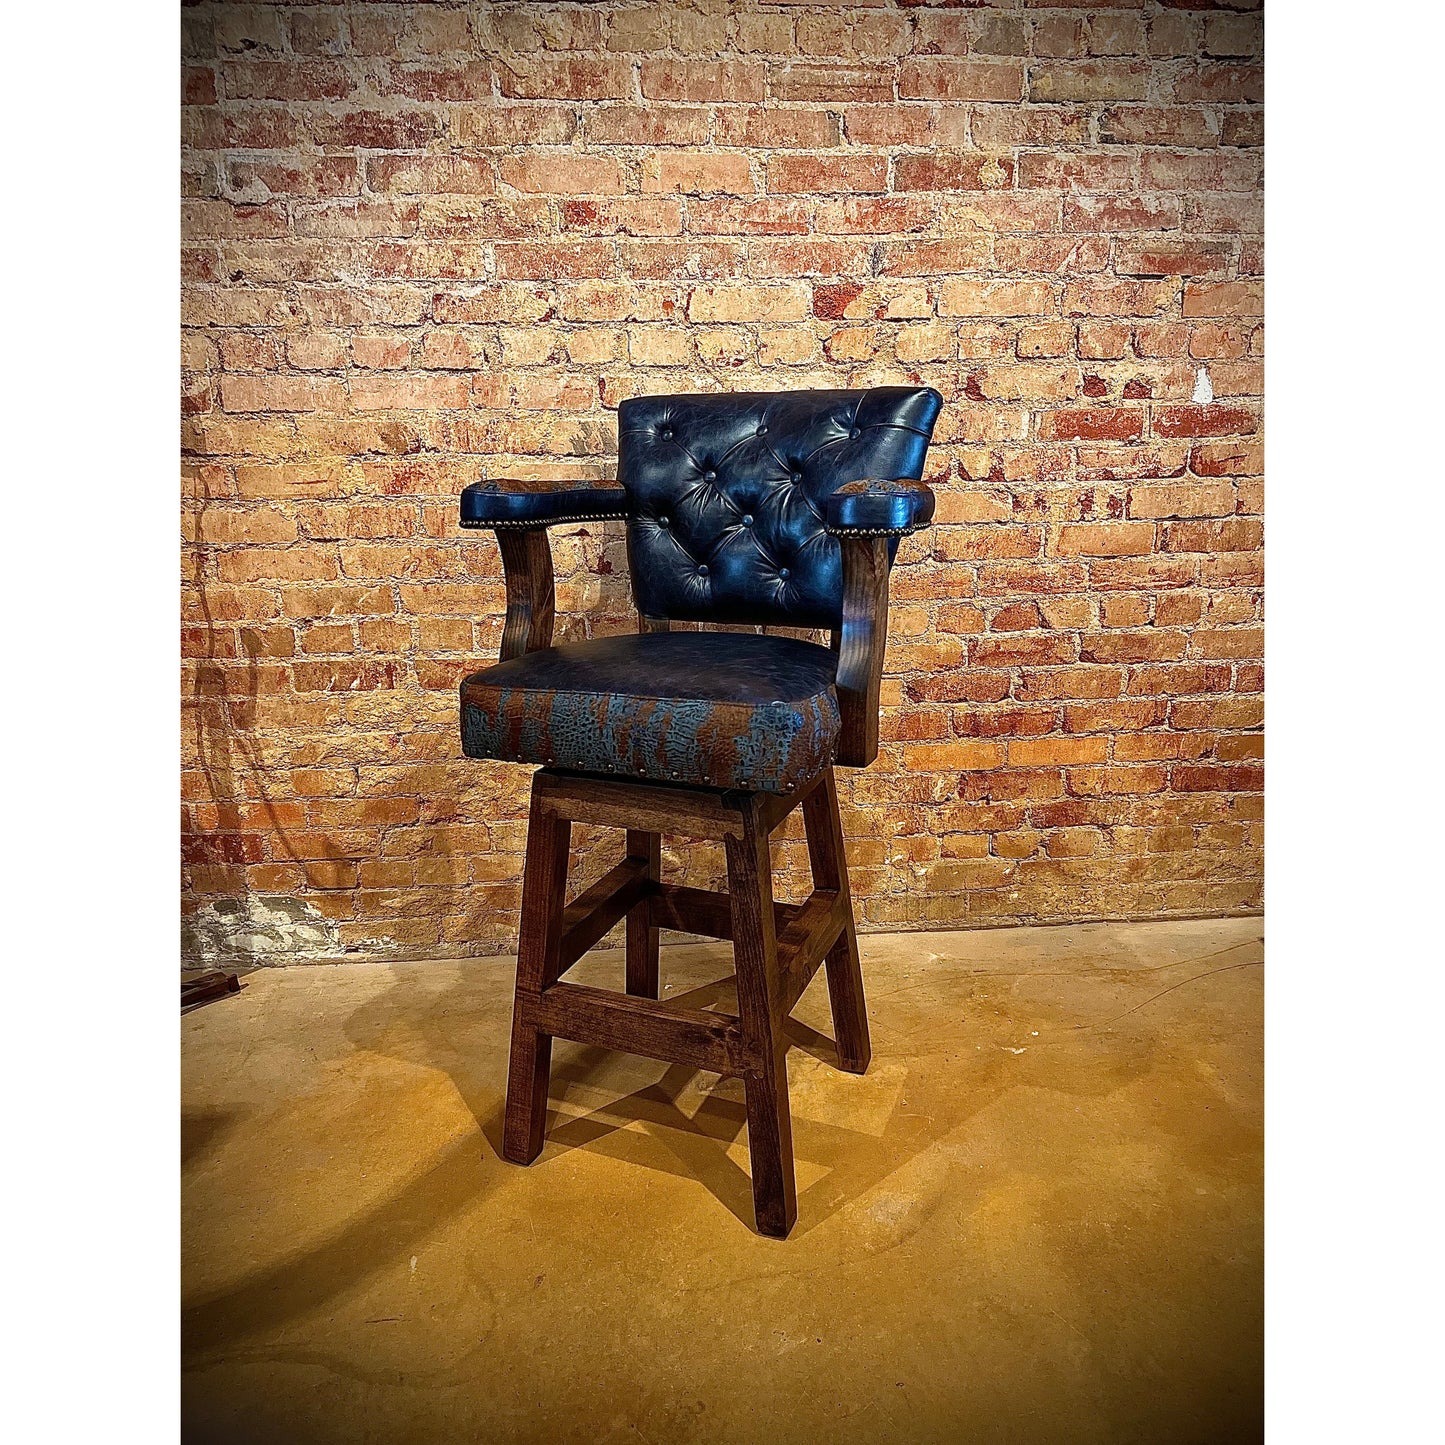 Add a touch of western flair to any room with the Blue Acid Croc Chisum Barstool. The acid wash croc accent cowhide and navy leather provide a unique and stylish look. With its comfortable design, this barstool is perfect for lounging or entertaining.